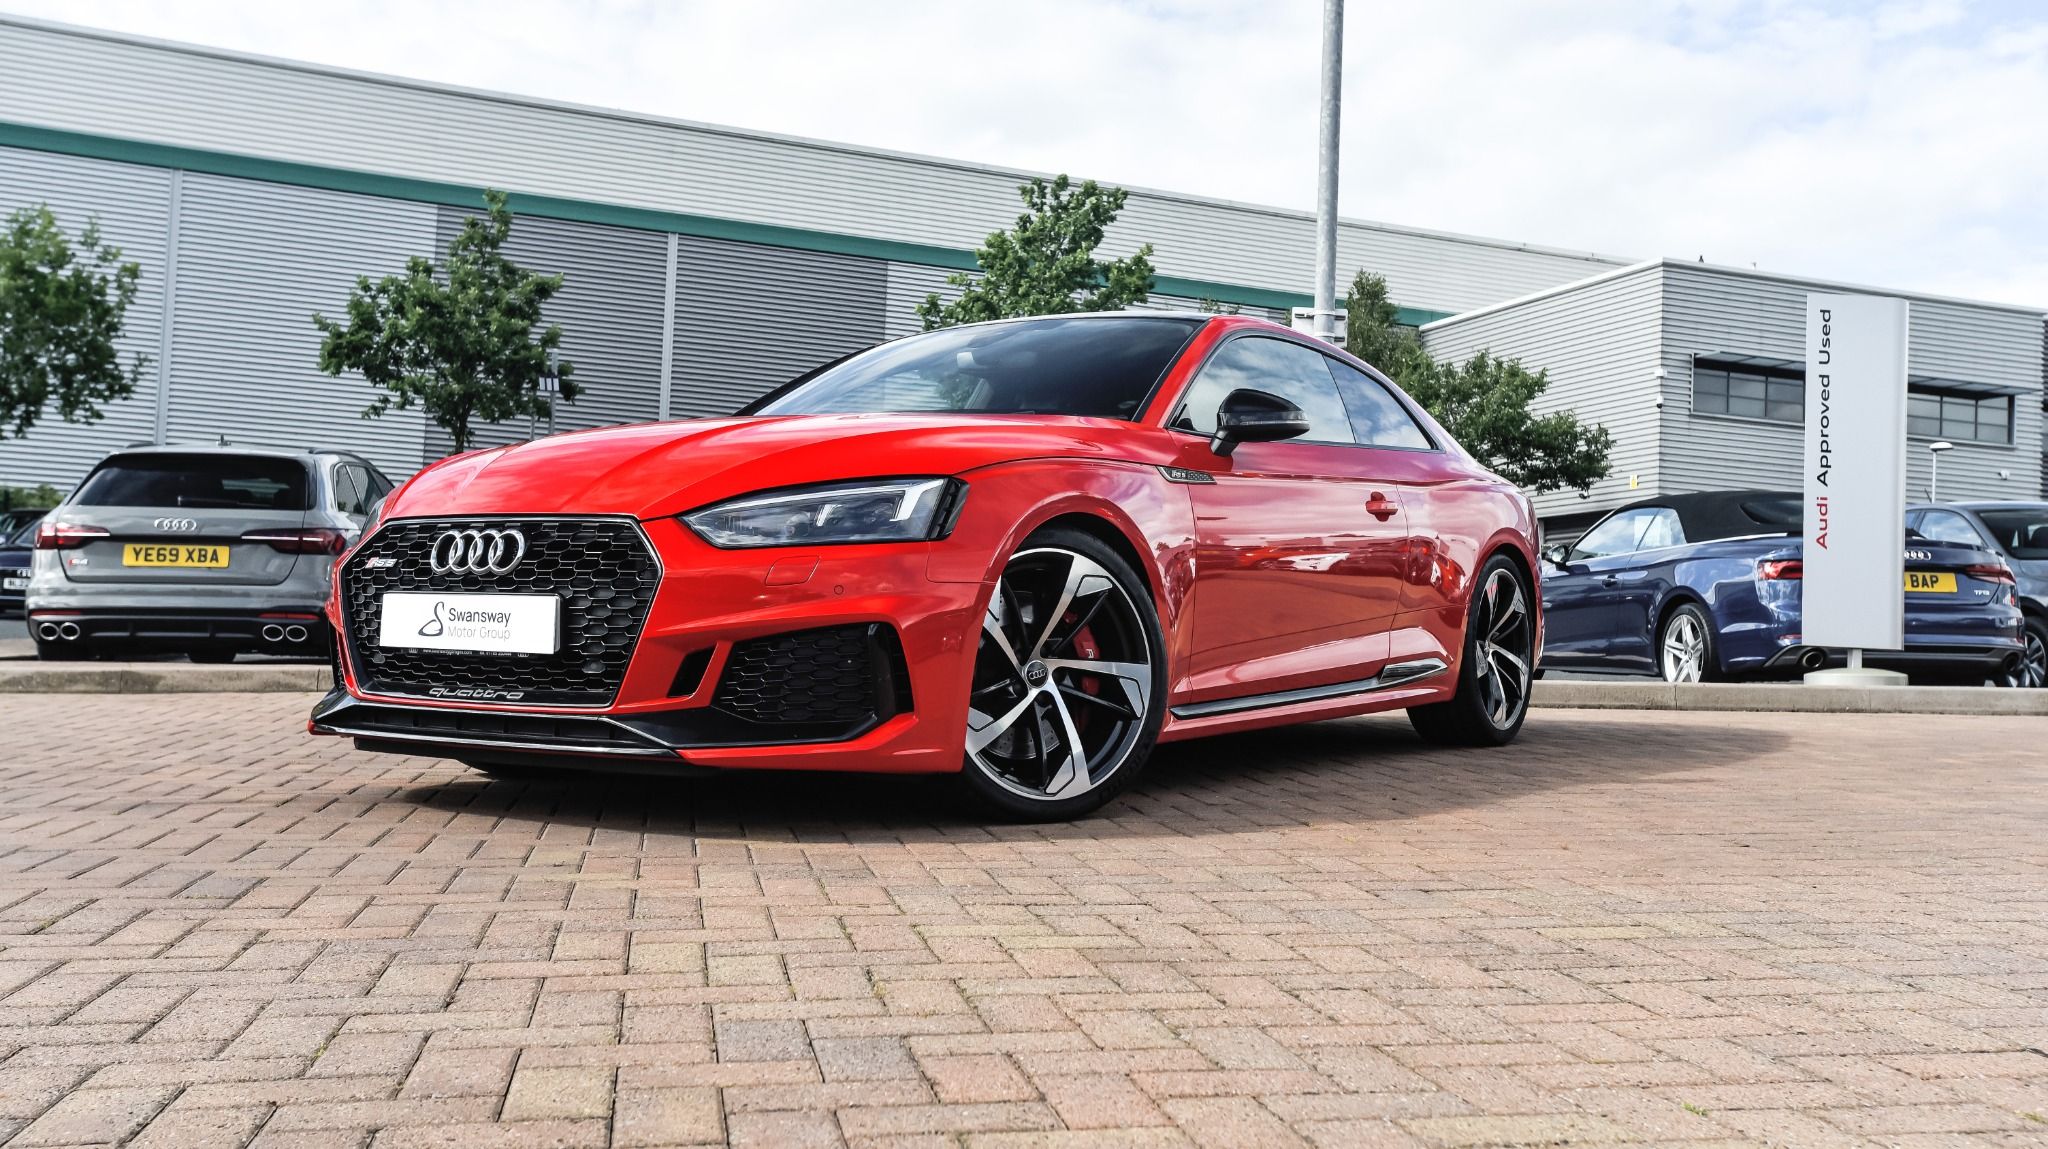 Front of Red Audi RS5 Coupé